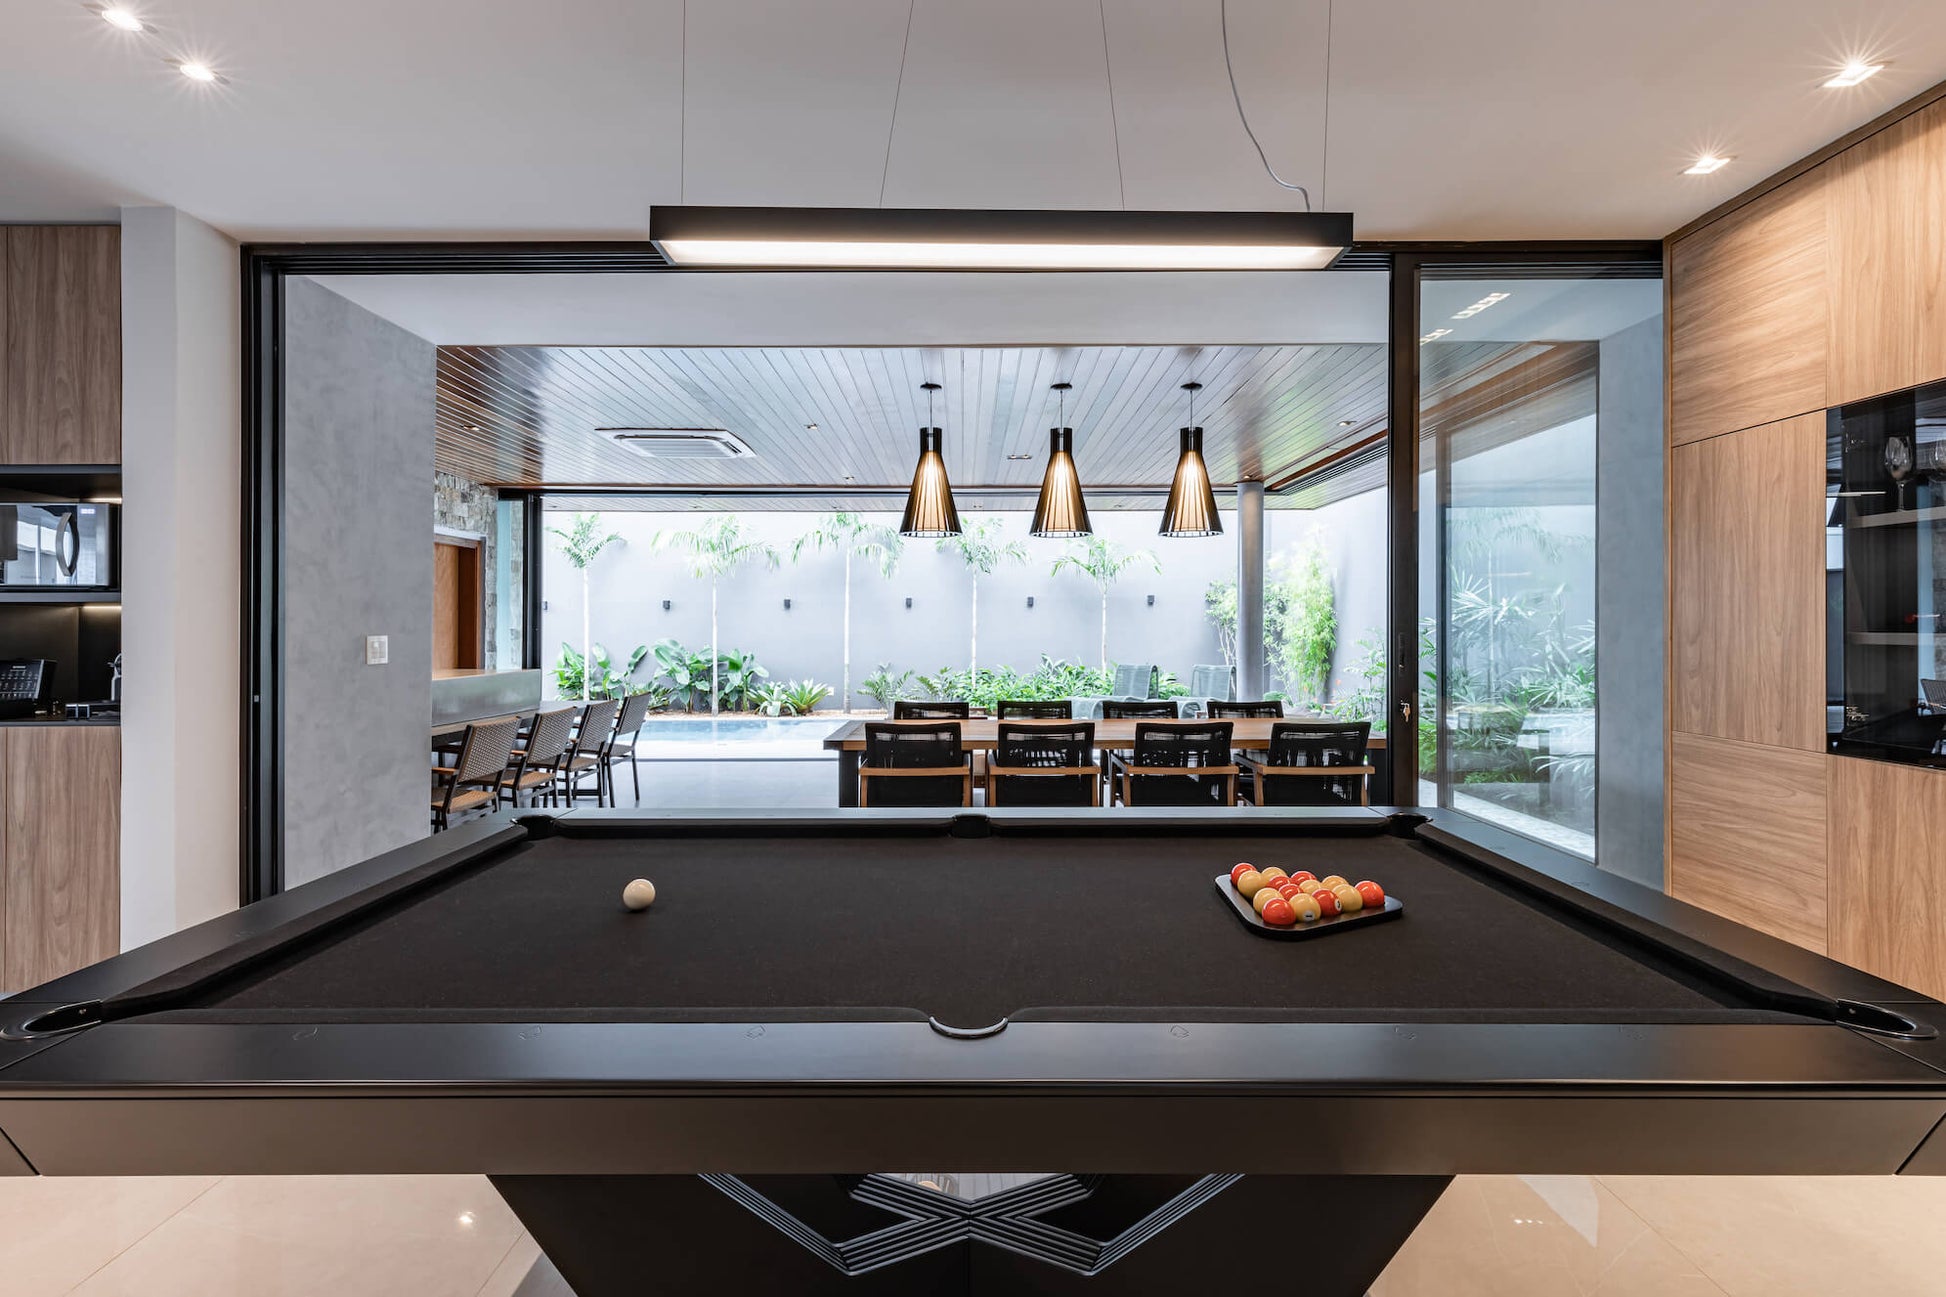 Atelier luxury billiards, mix of tradition and innovation